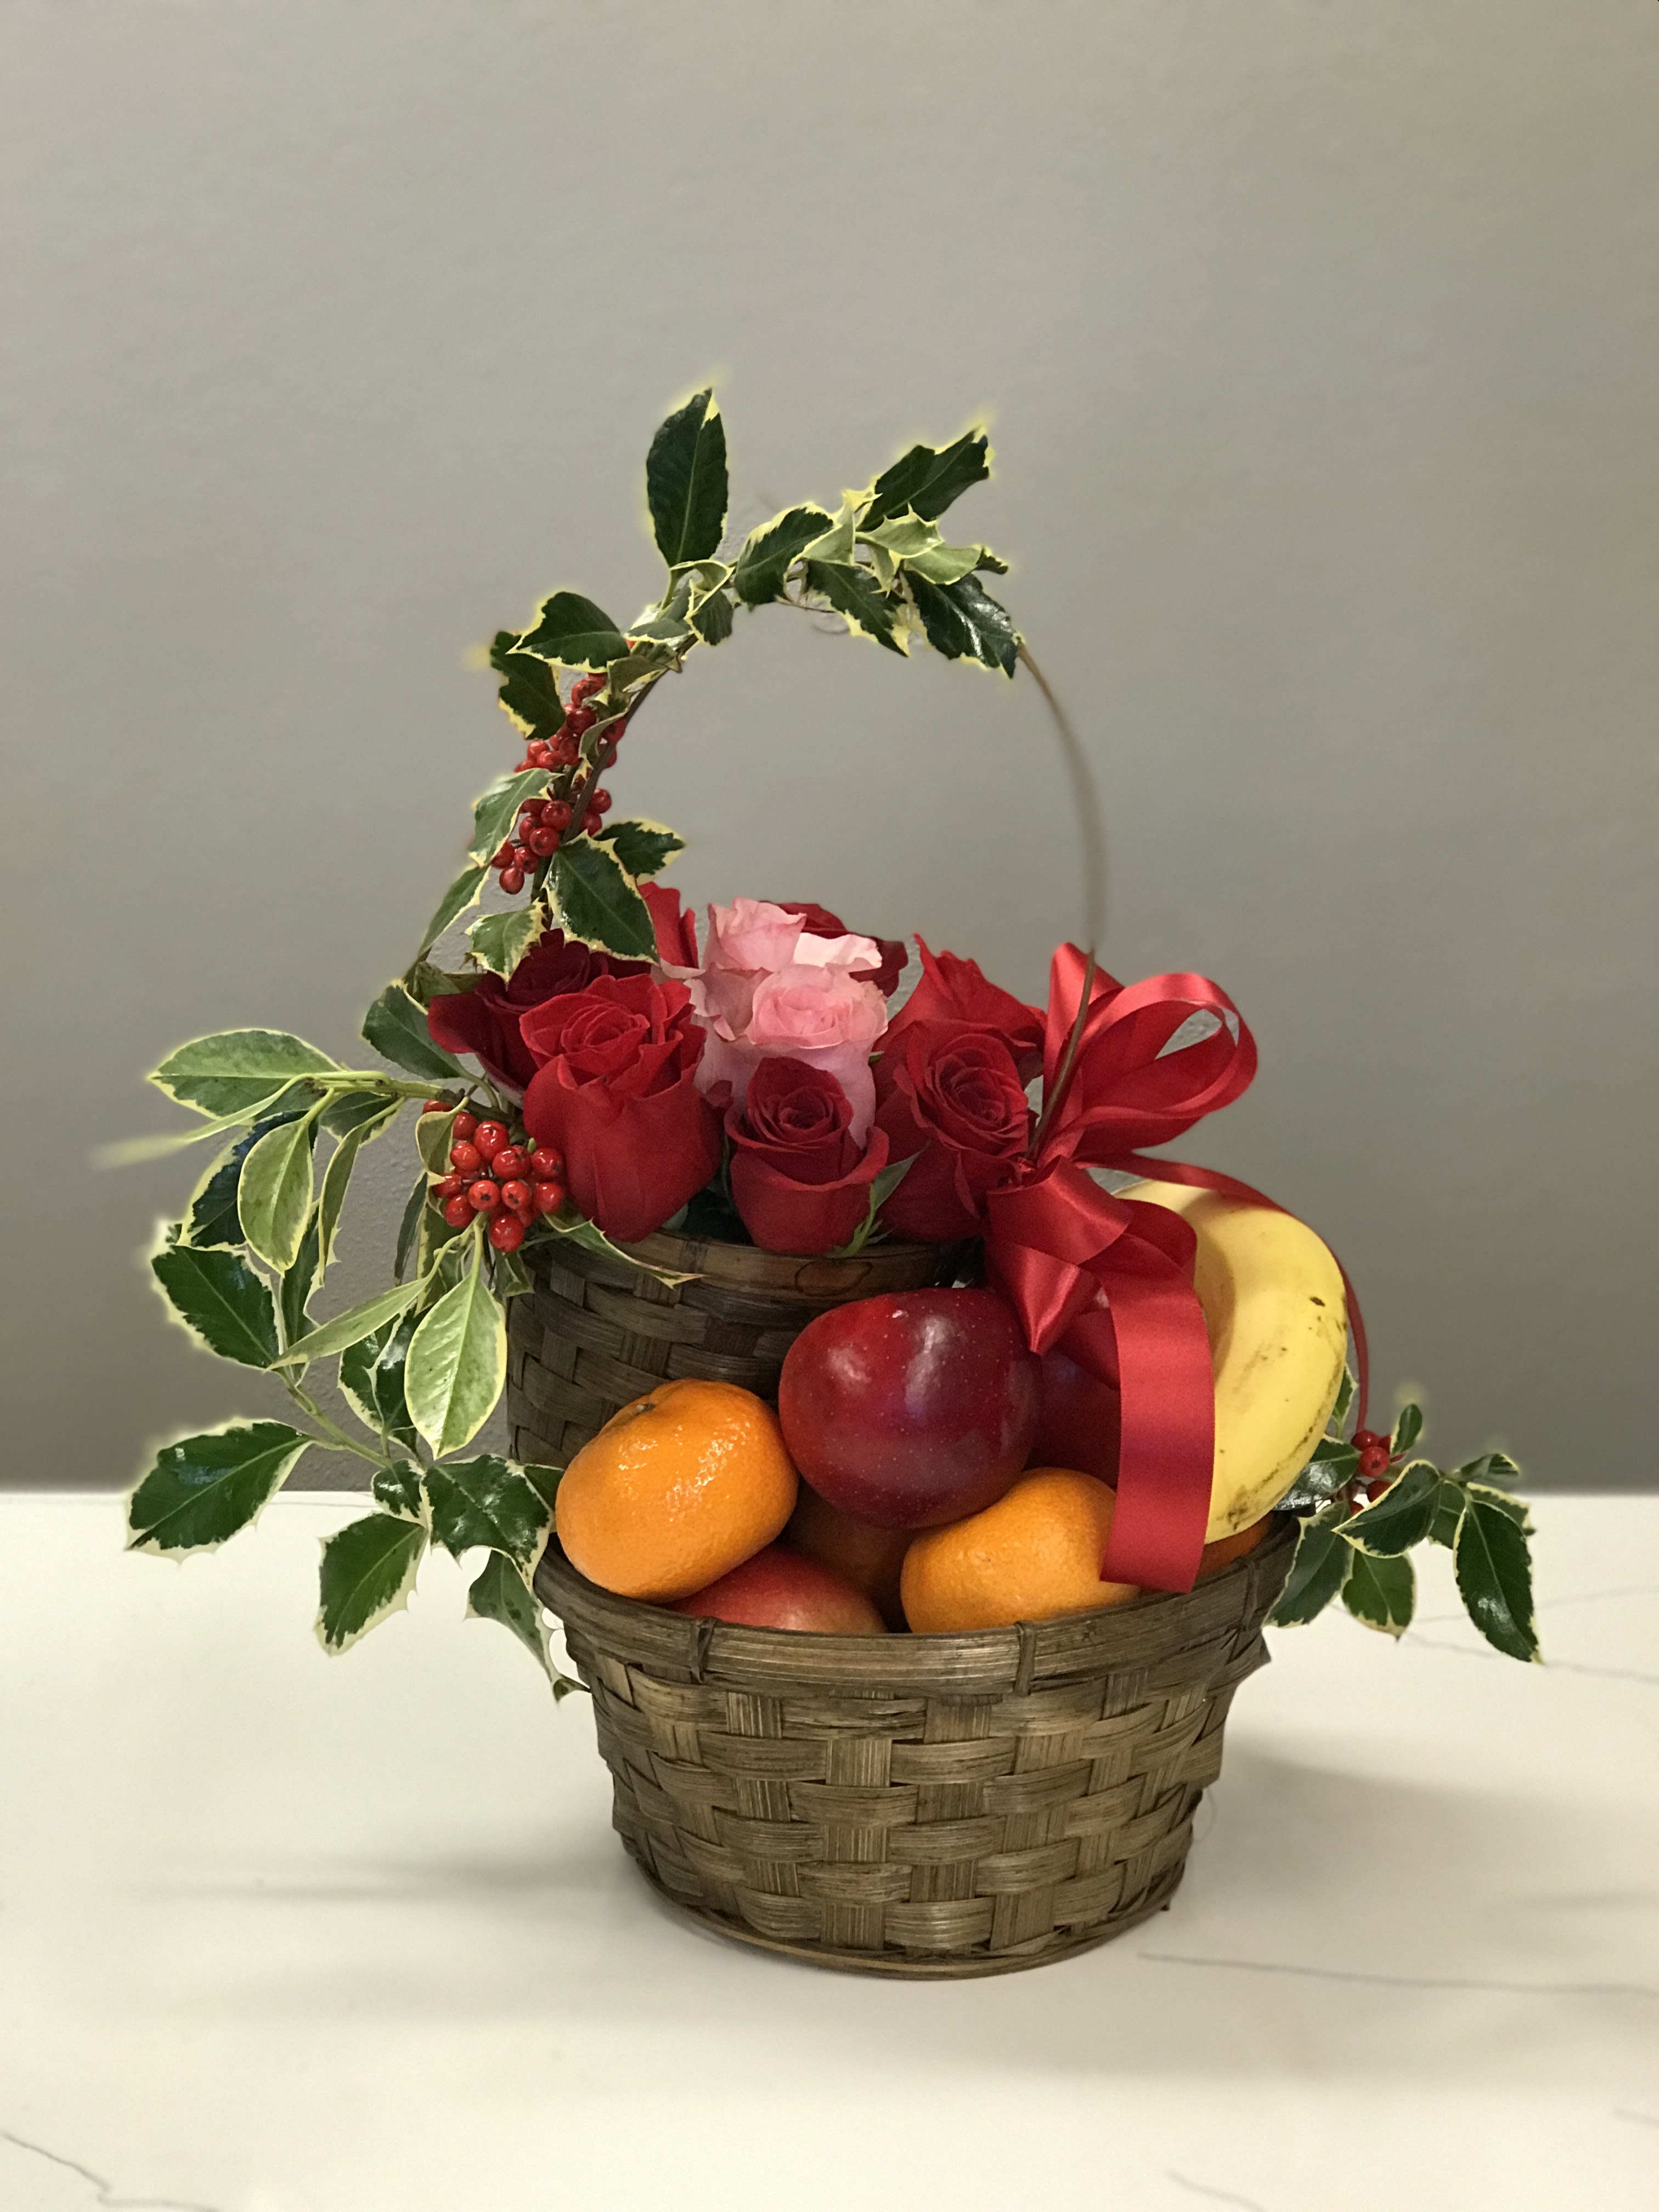 Rose and Fruit Holiday Basket - Say Merry Christmas and Happy Holidays to your loved ones with both flowers AND fruit. Yay for thoughtfulness!!